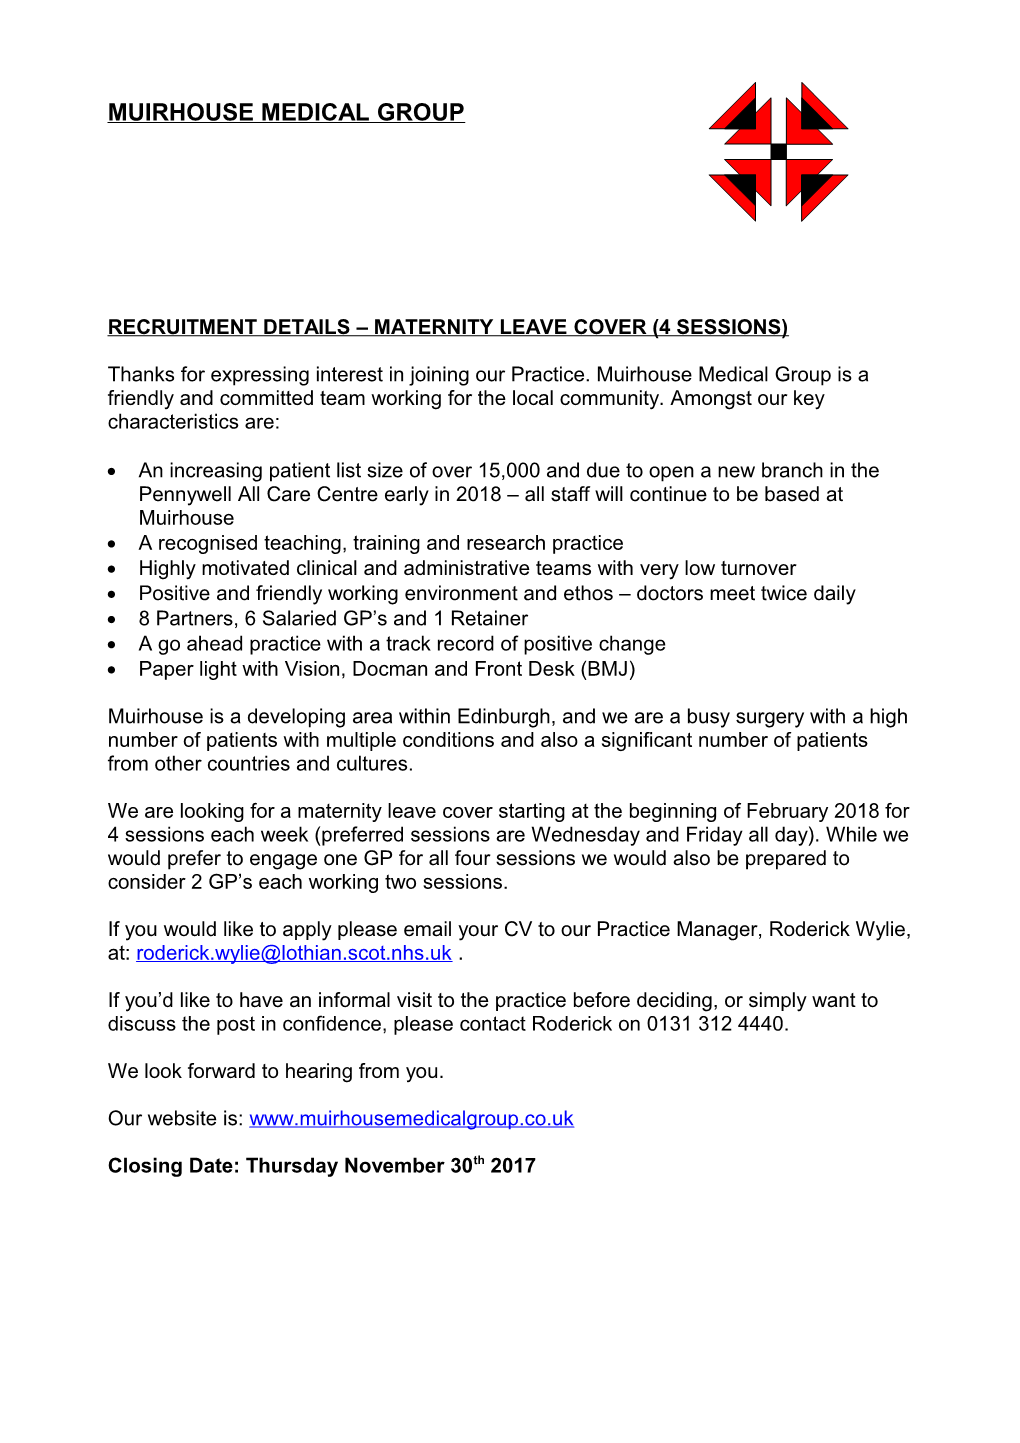 Recruitment Details Maternity Leave Cover (4 Sessions)